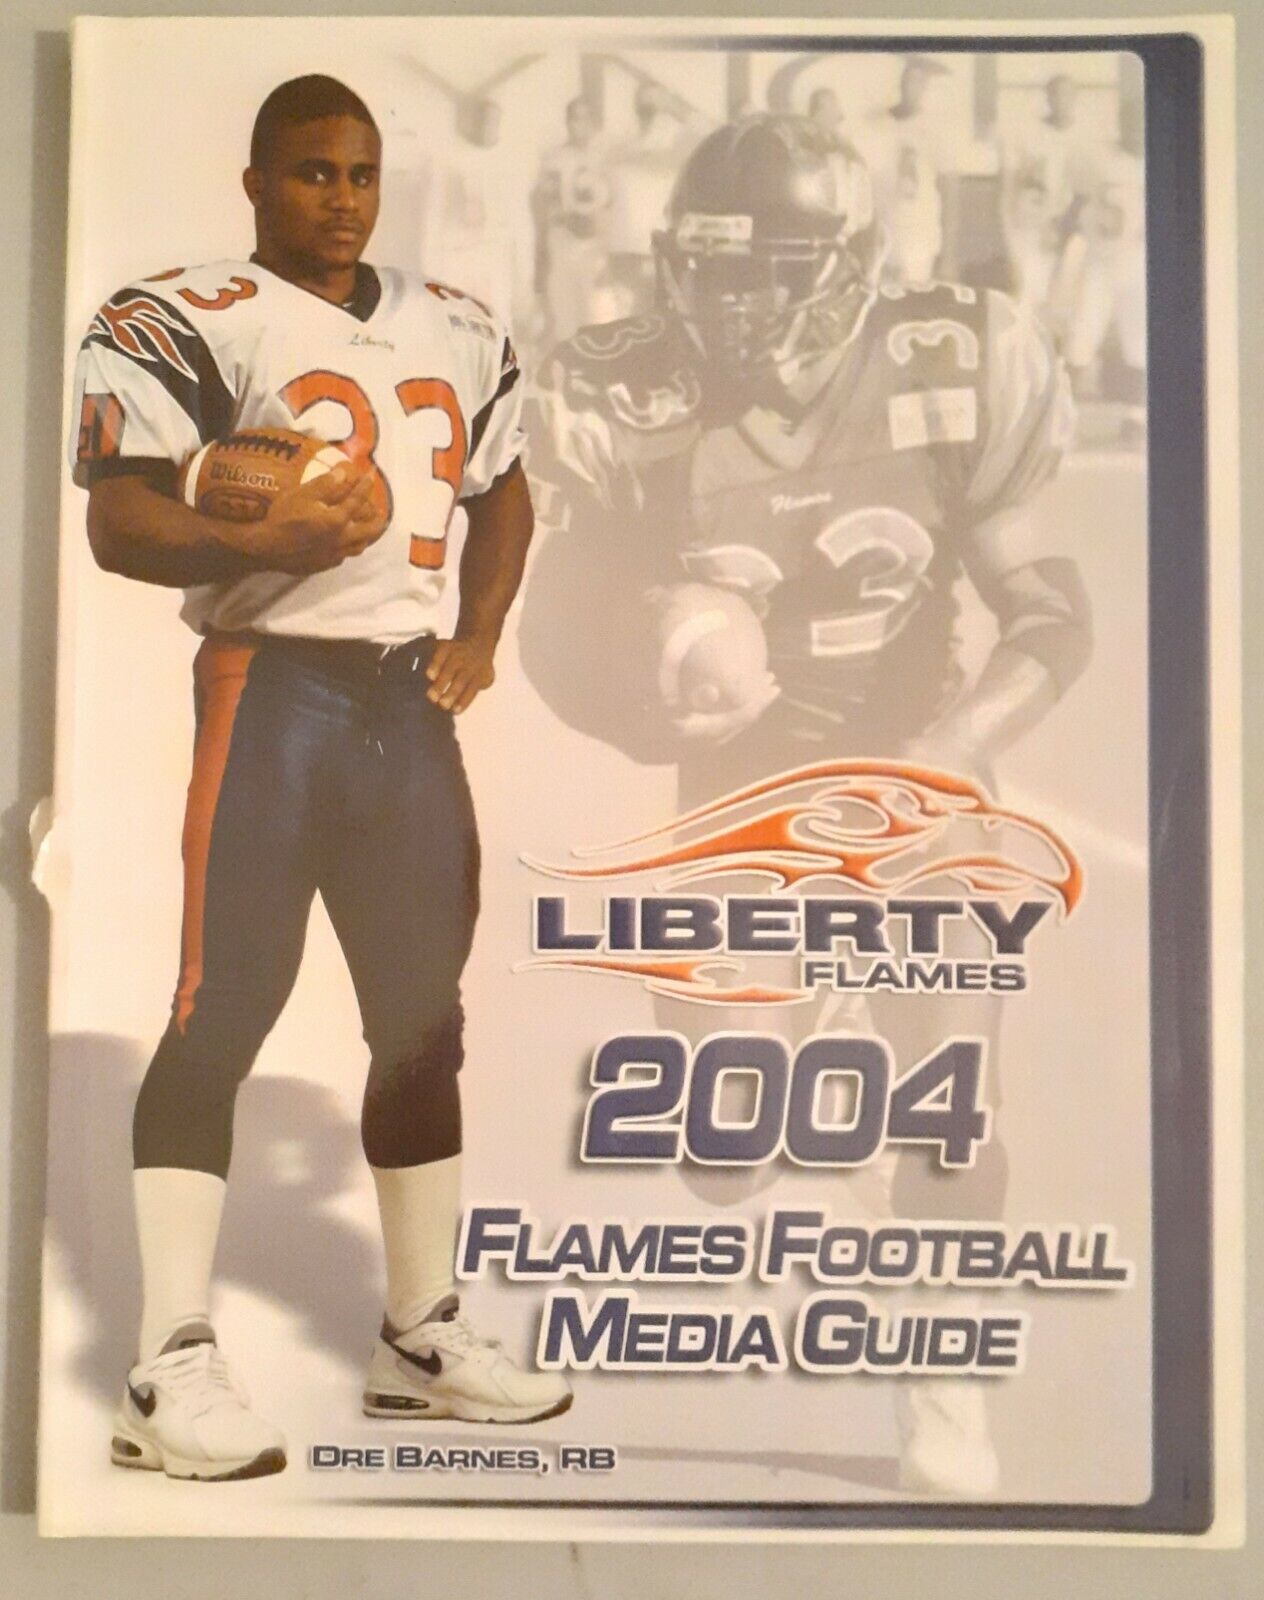 2004 Liberty College Guide Branded goods Media Football specialty shop